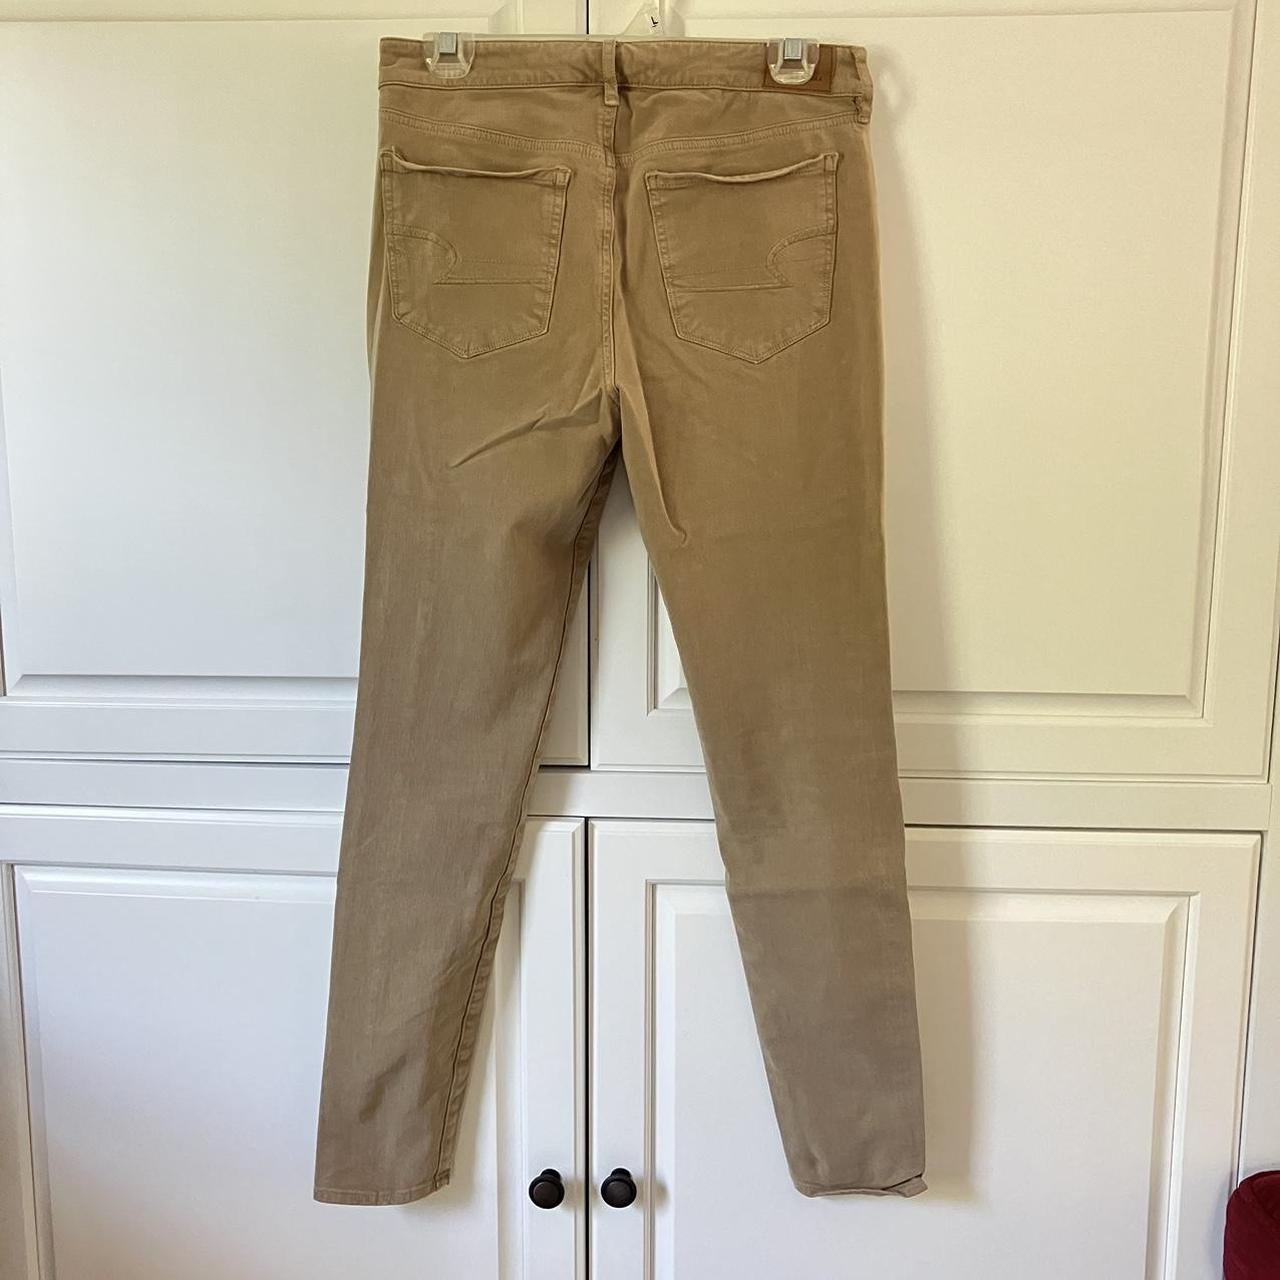 American Eagle Outfitters Women's Tan and Khaki Trousers (2)